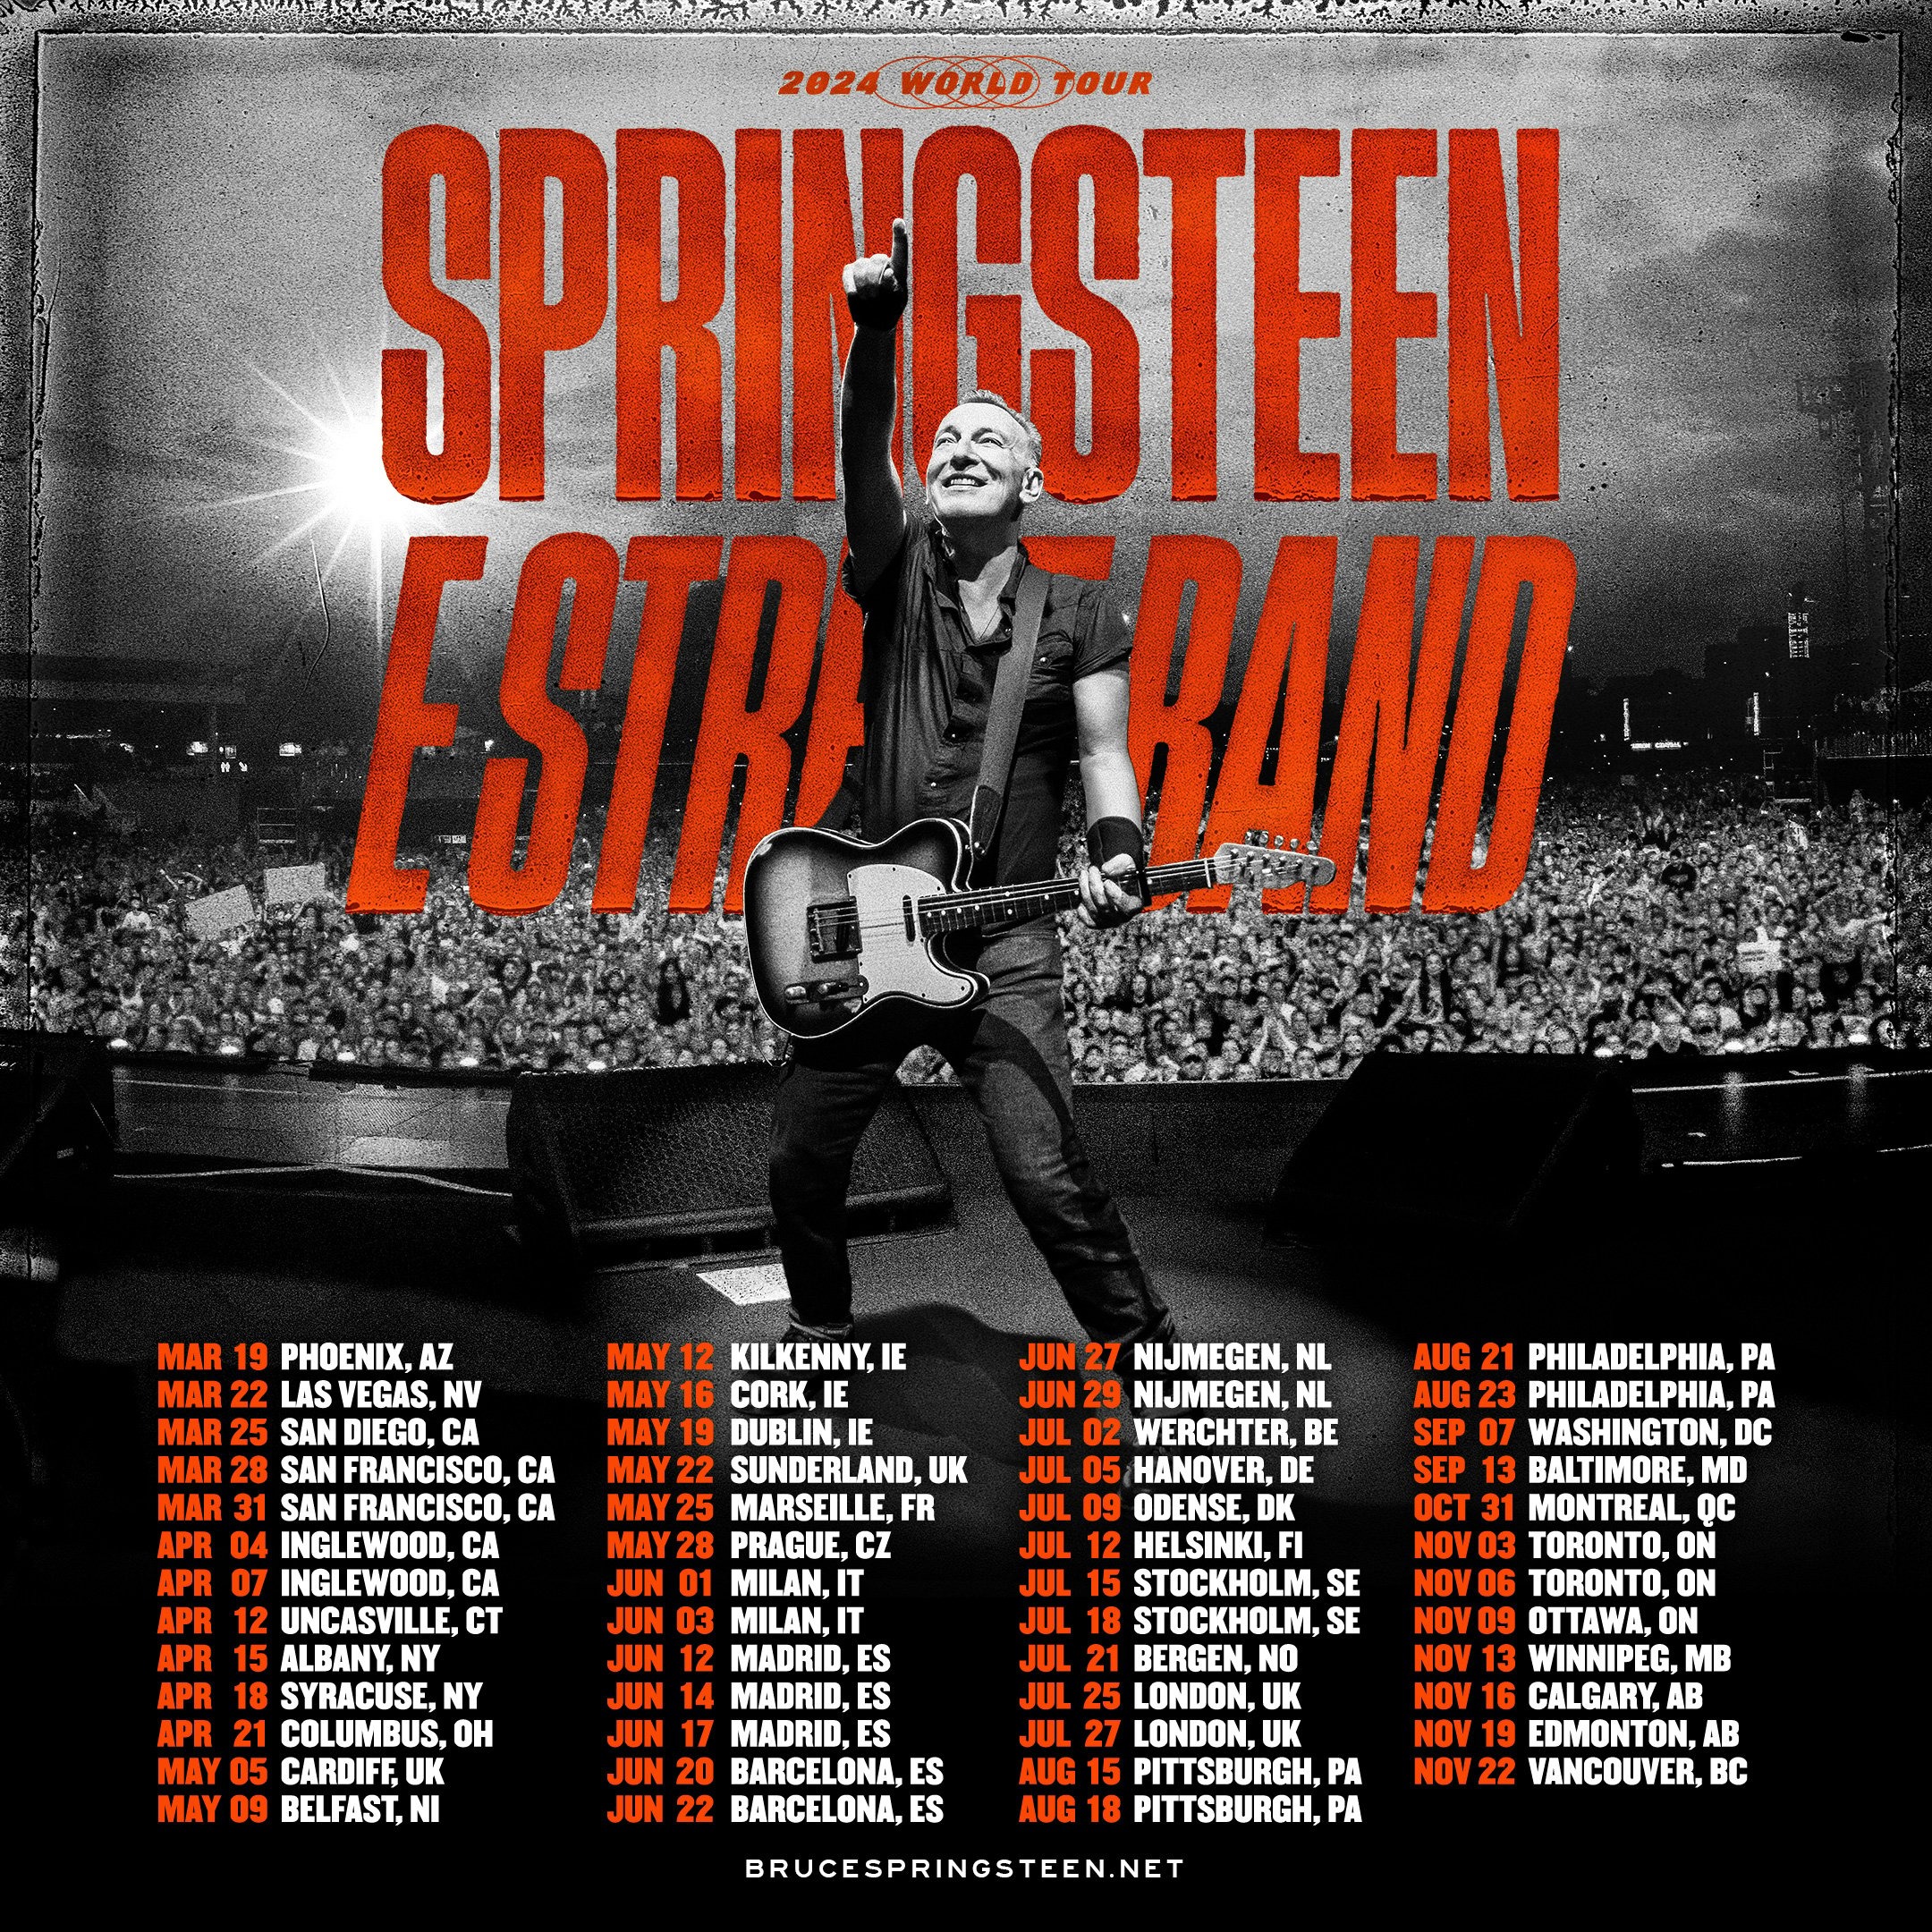 Get Ready to Sing Along! Bruce Springsteen Announces World Tour Dates